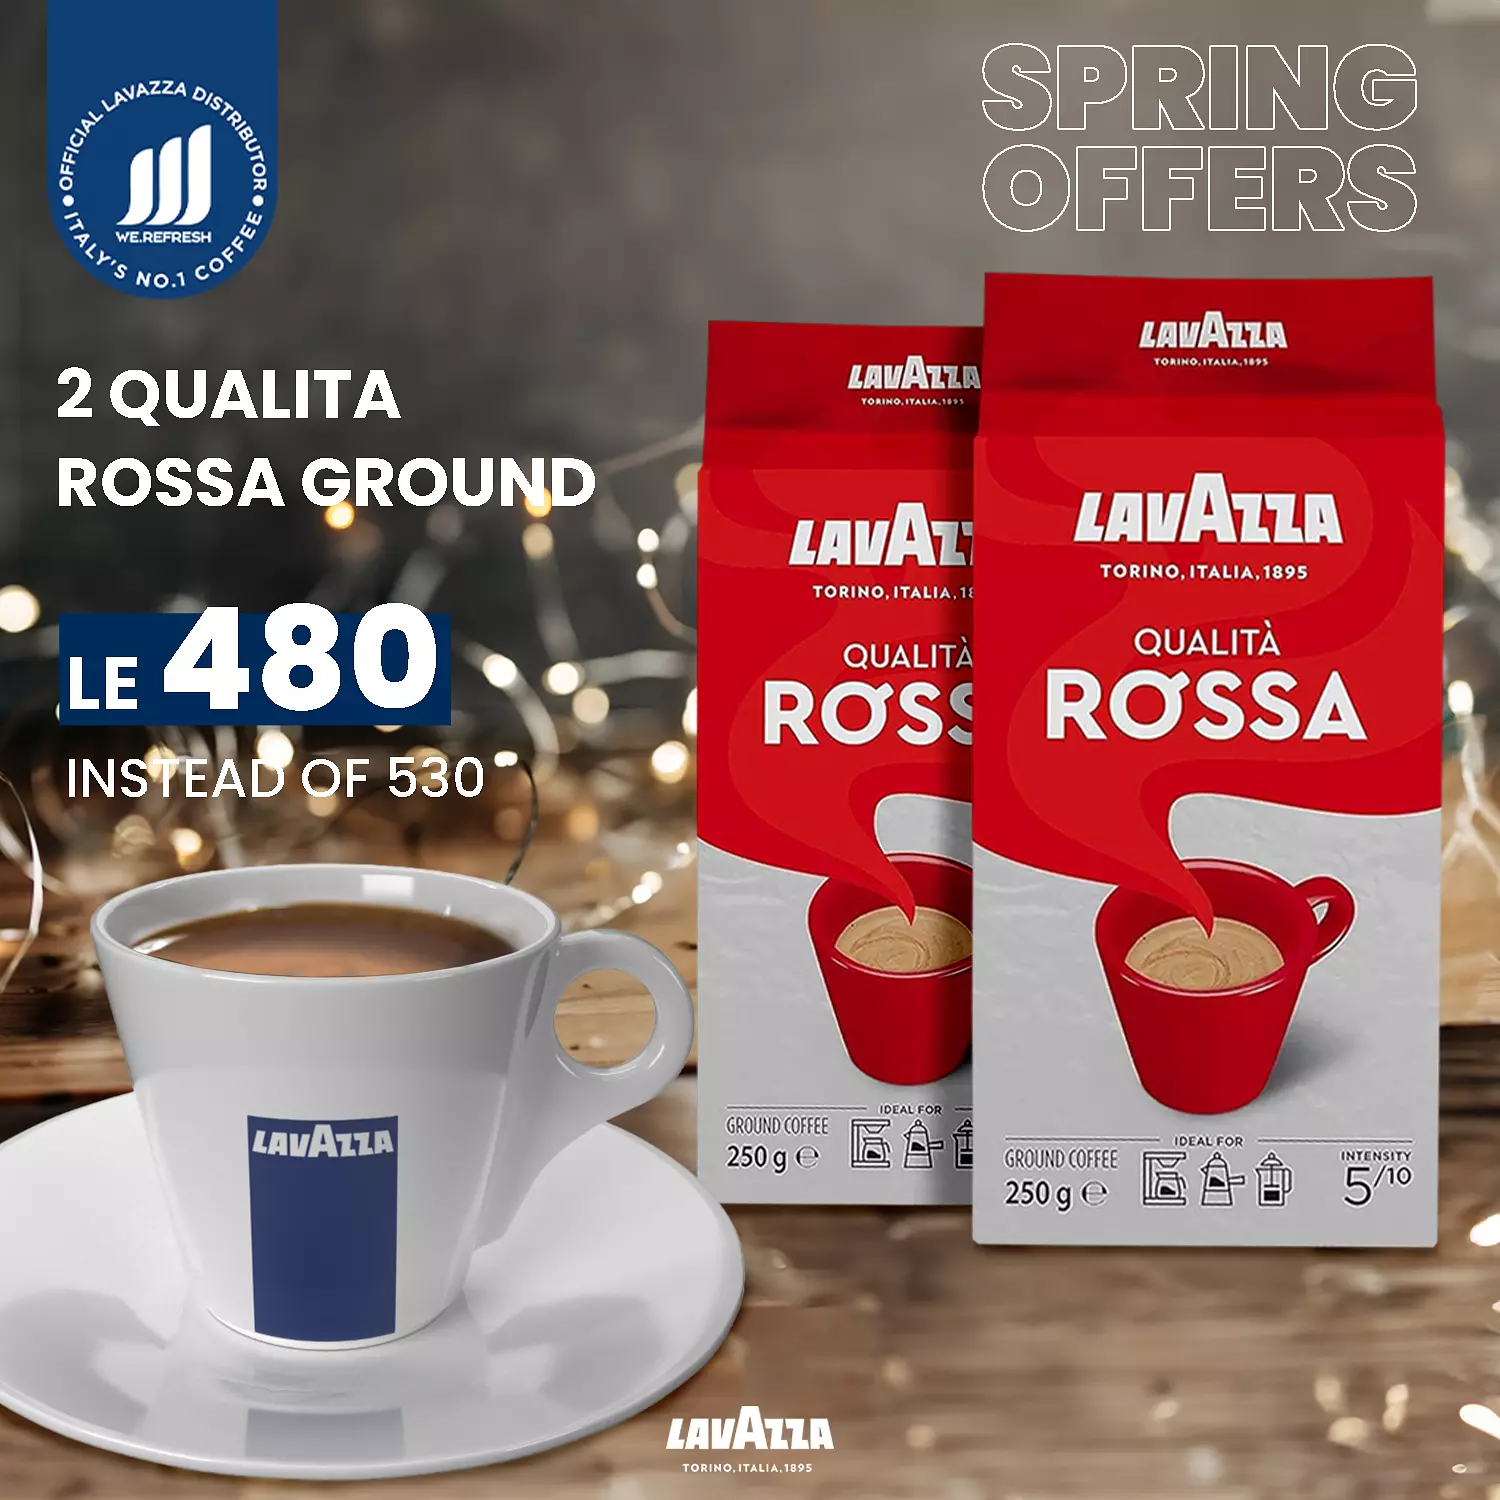 Lavazza spring offers  hover image